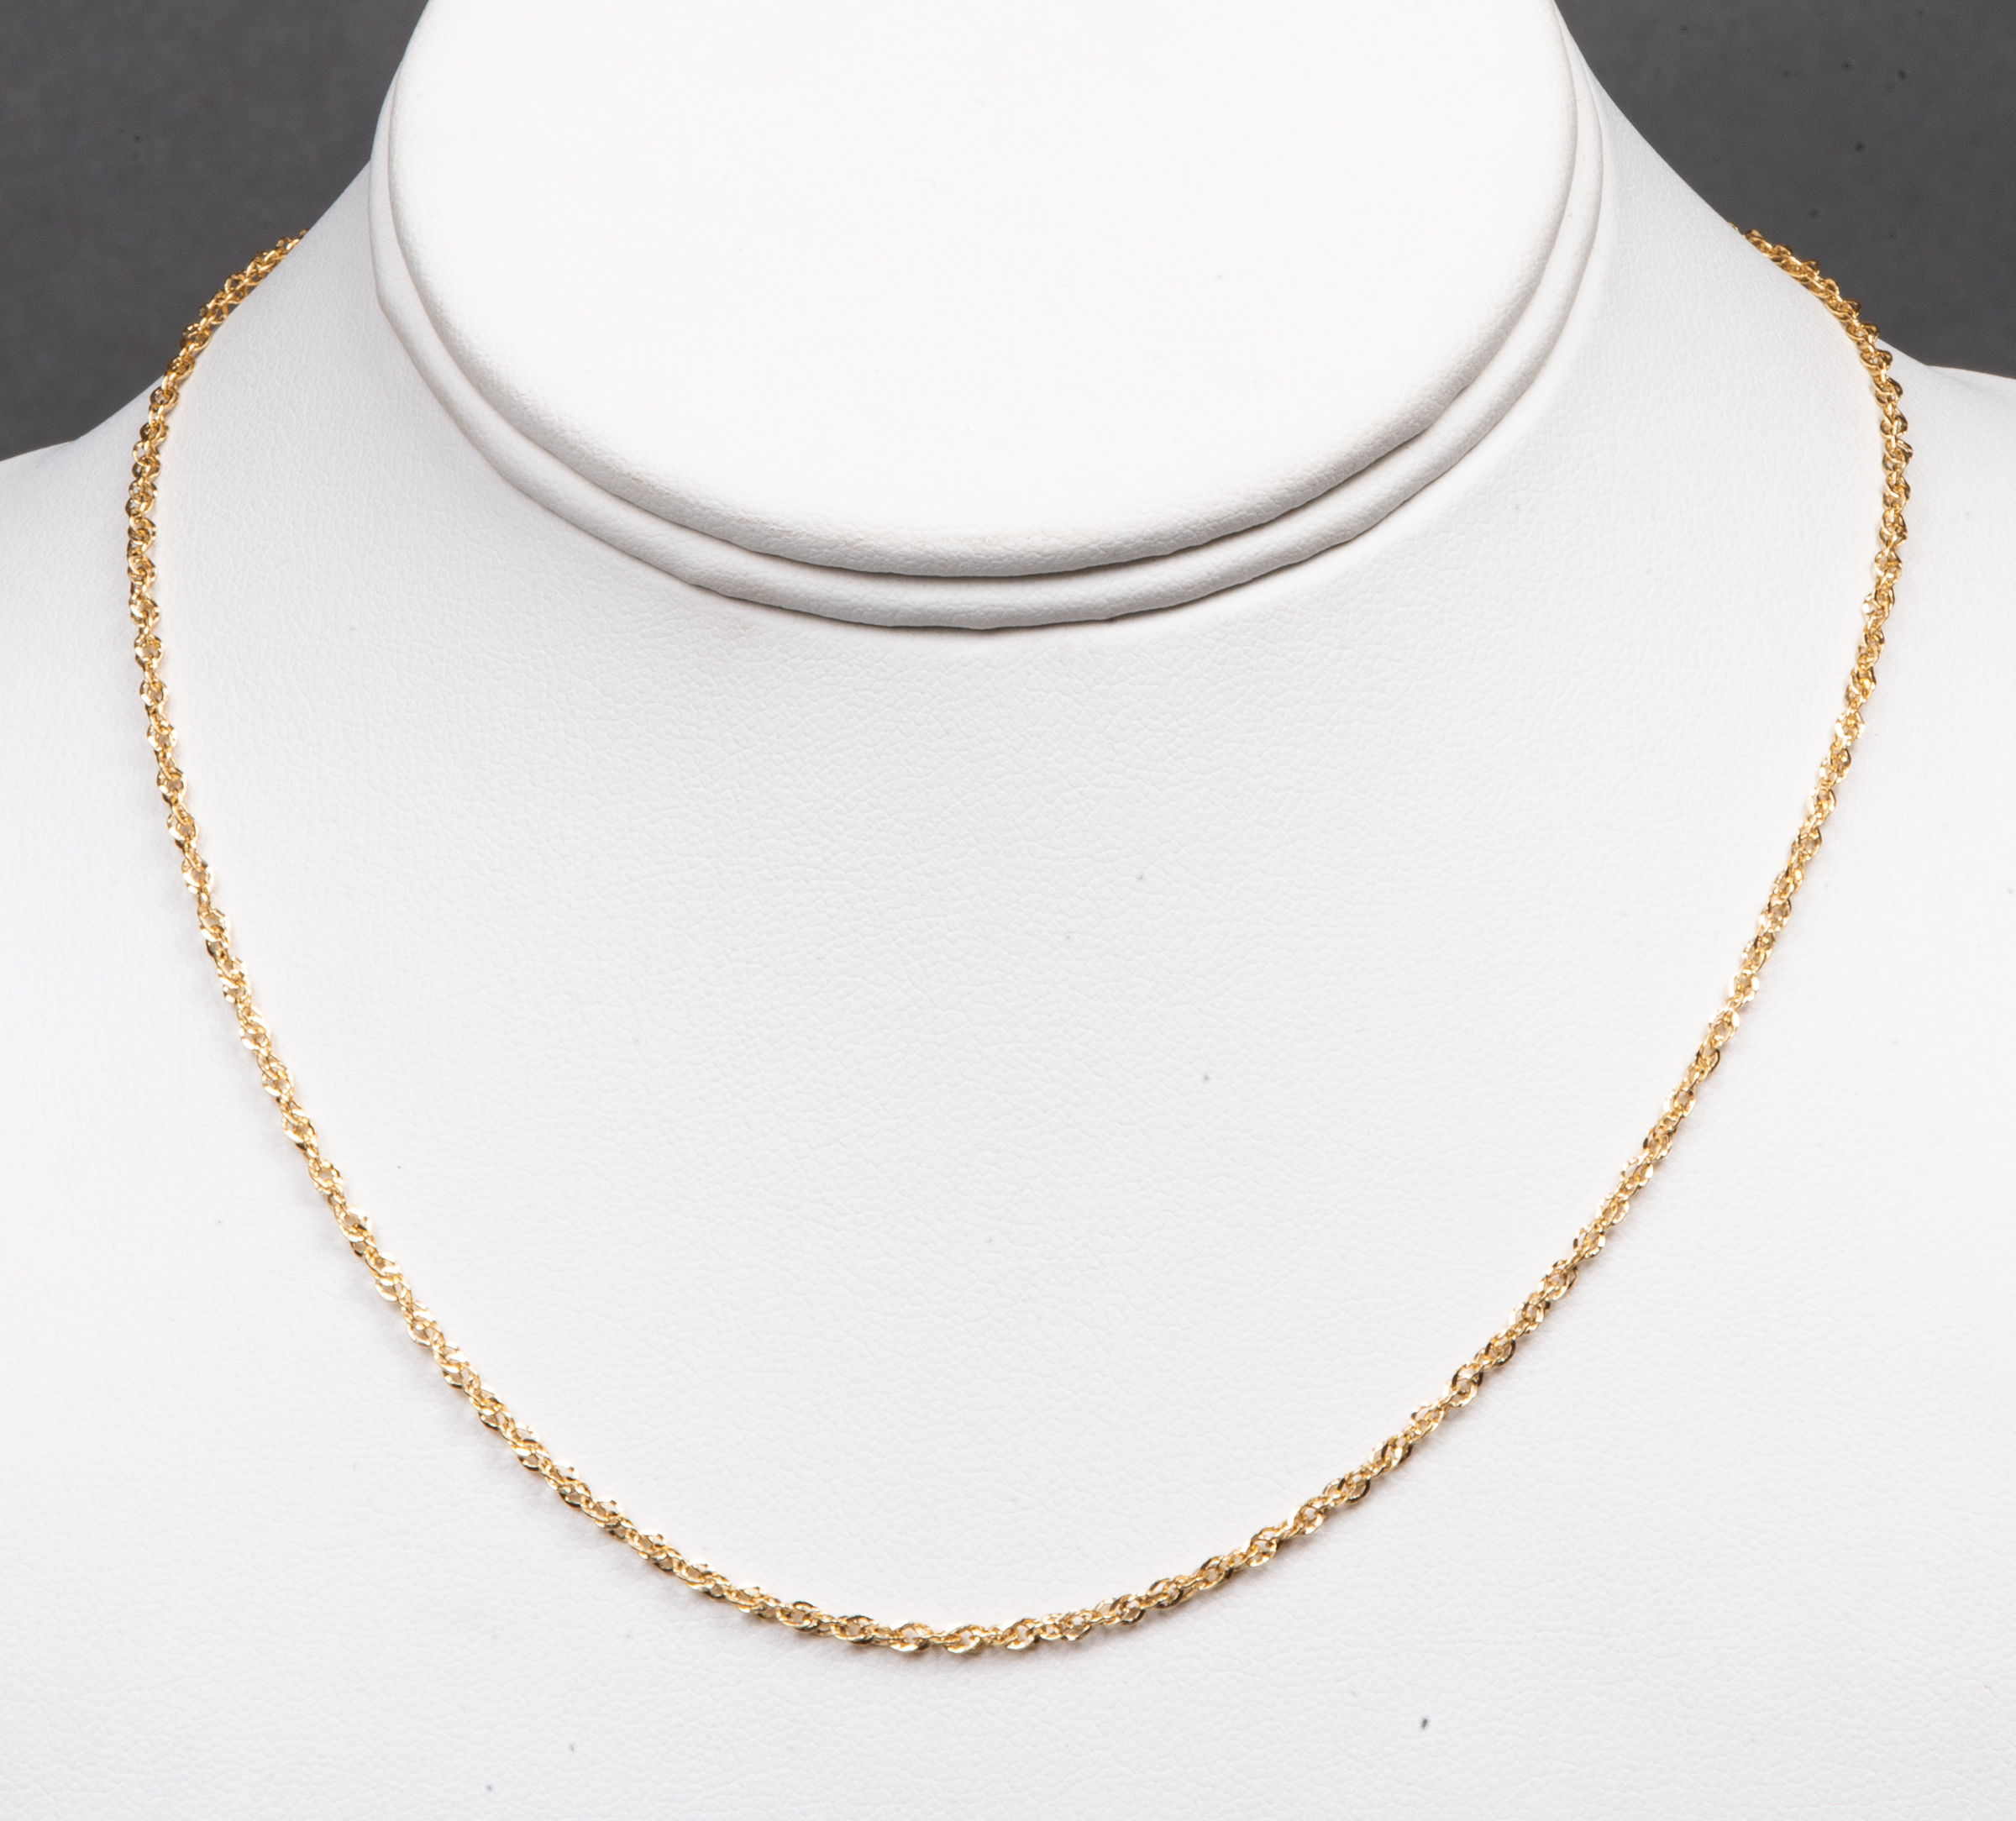 14K YELLOW GOLD SINGAPORE CHAIN 3c3a3d